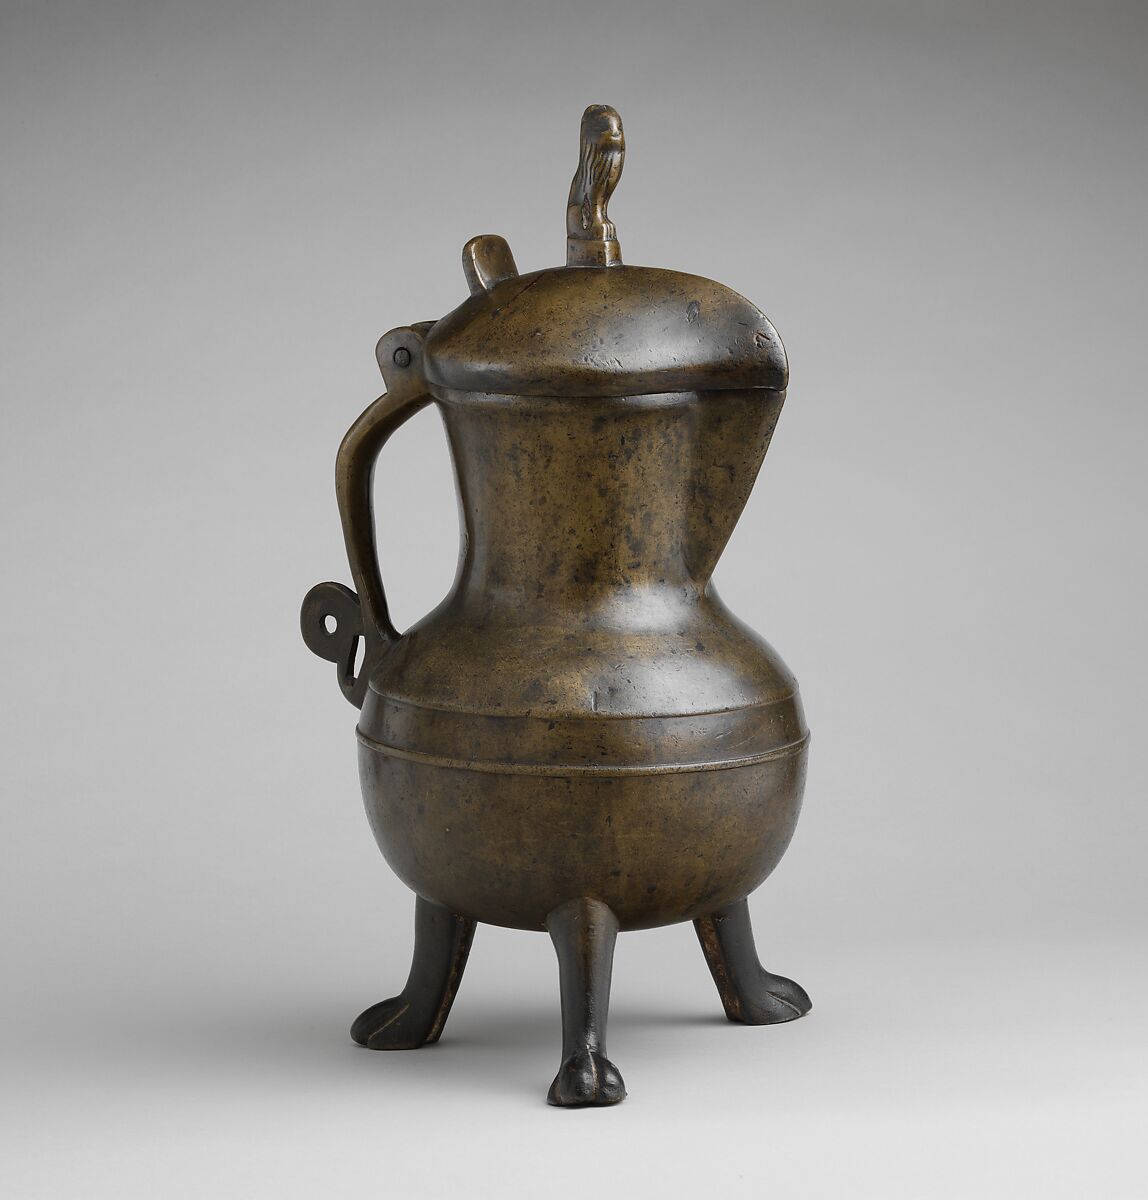 Covered Vessel, Copper alloy, South Netherlandish